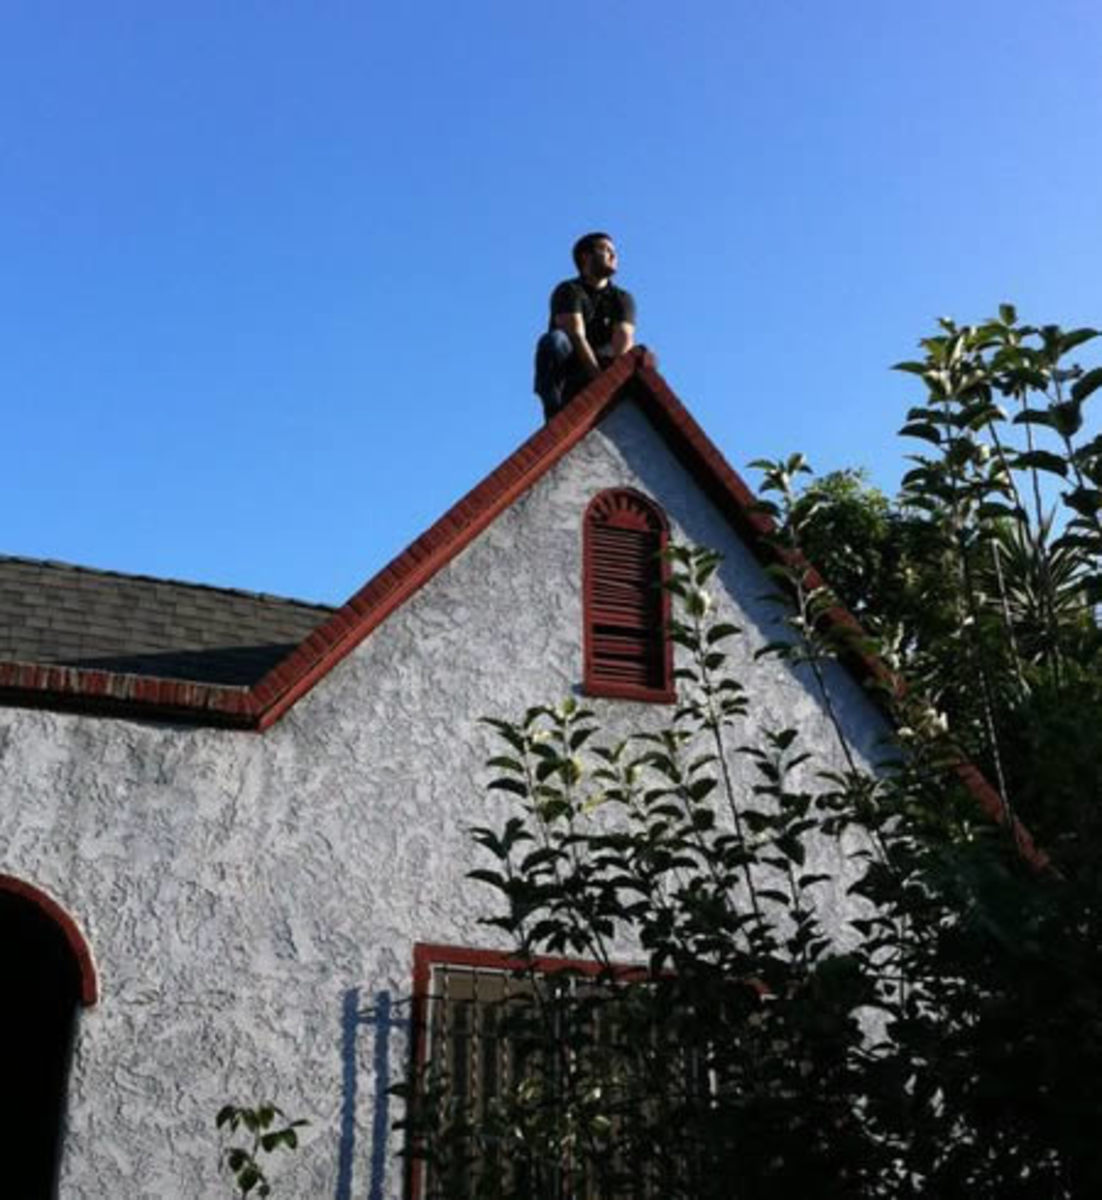 Owling on the roof of a house